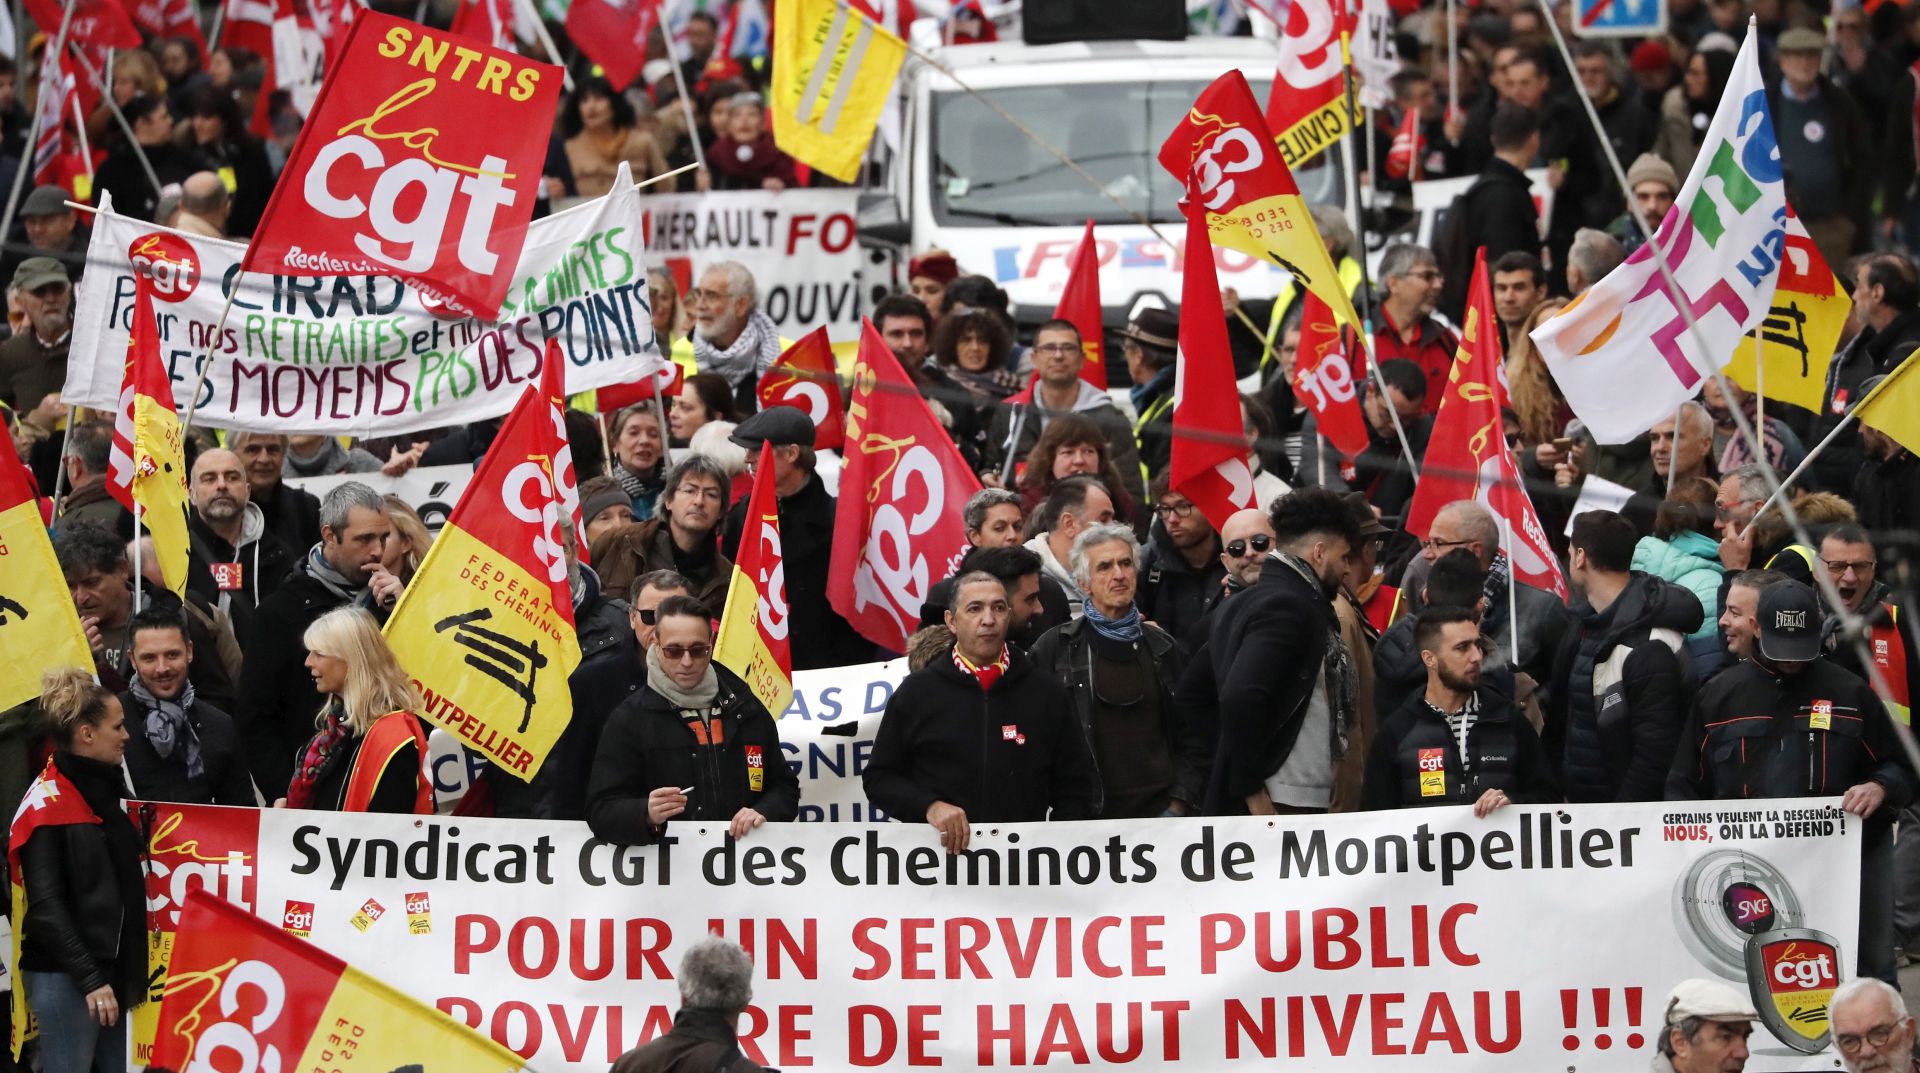 epa08065696 Members of the 'Confederation Generale du Travail' (CGT) trade union participate in a demonstration against pension reforms in Montpellier, France, 12 December 2019. Unions representing railway and transport workers and many others in the public sector have called for a general strike and demonstration to protest against French government's reform of the pension system.  EPA/GUILLAUME HORCAJUELO